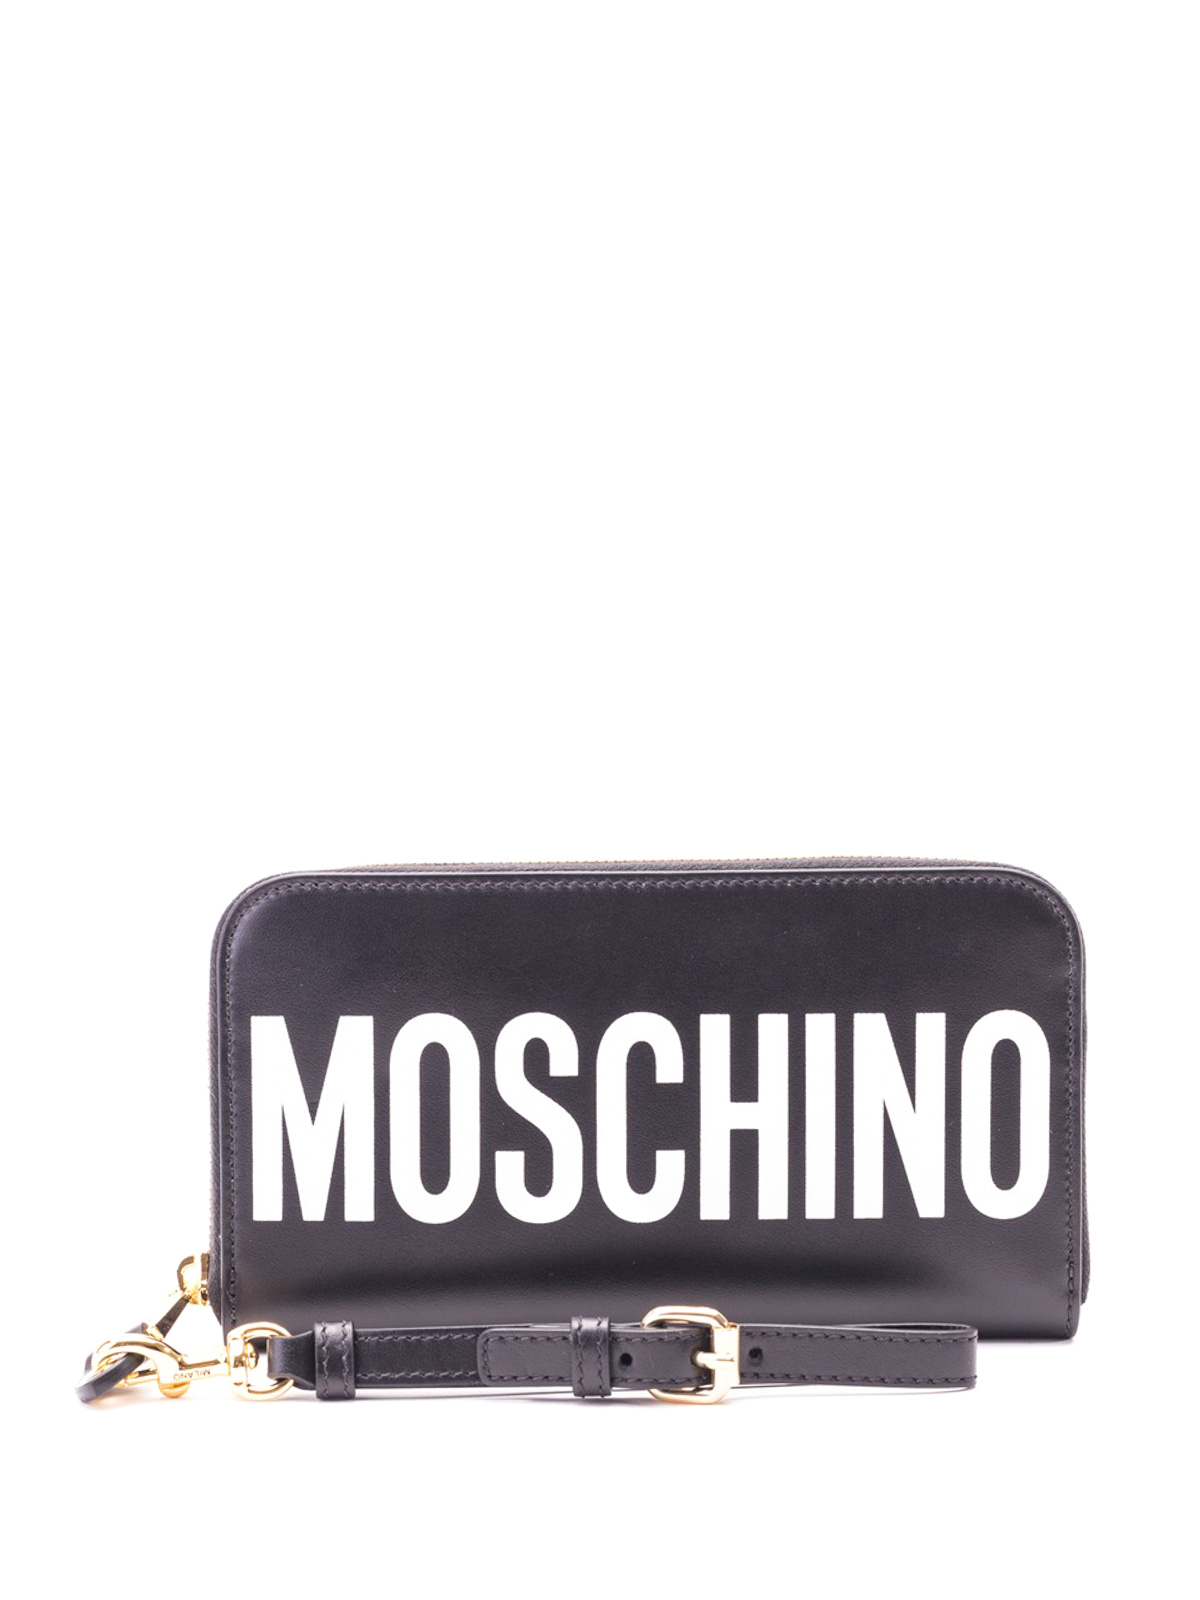 Moschino Contrasting Logo Leather Continental Wallet In Black